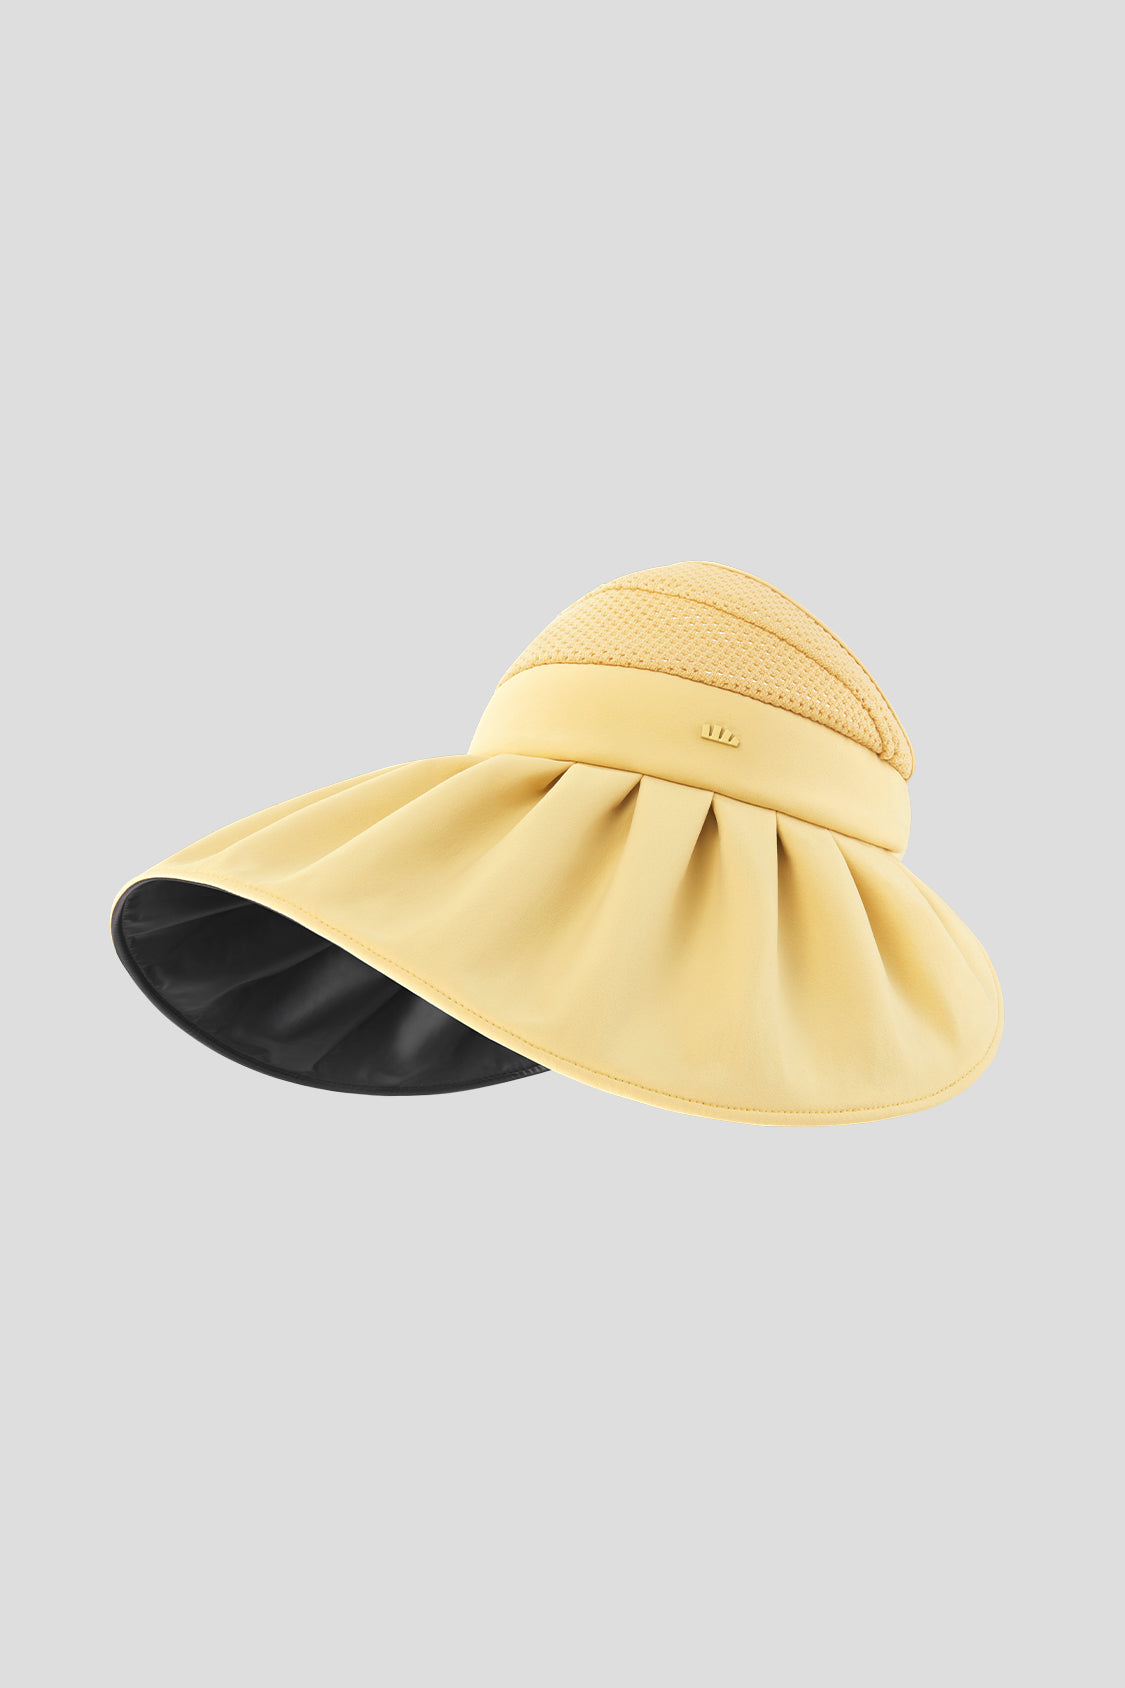 Portable Sun Hats Summer Sports Caps With Cooling Fans UV